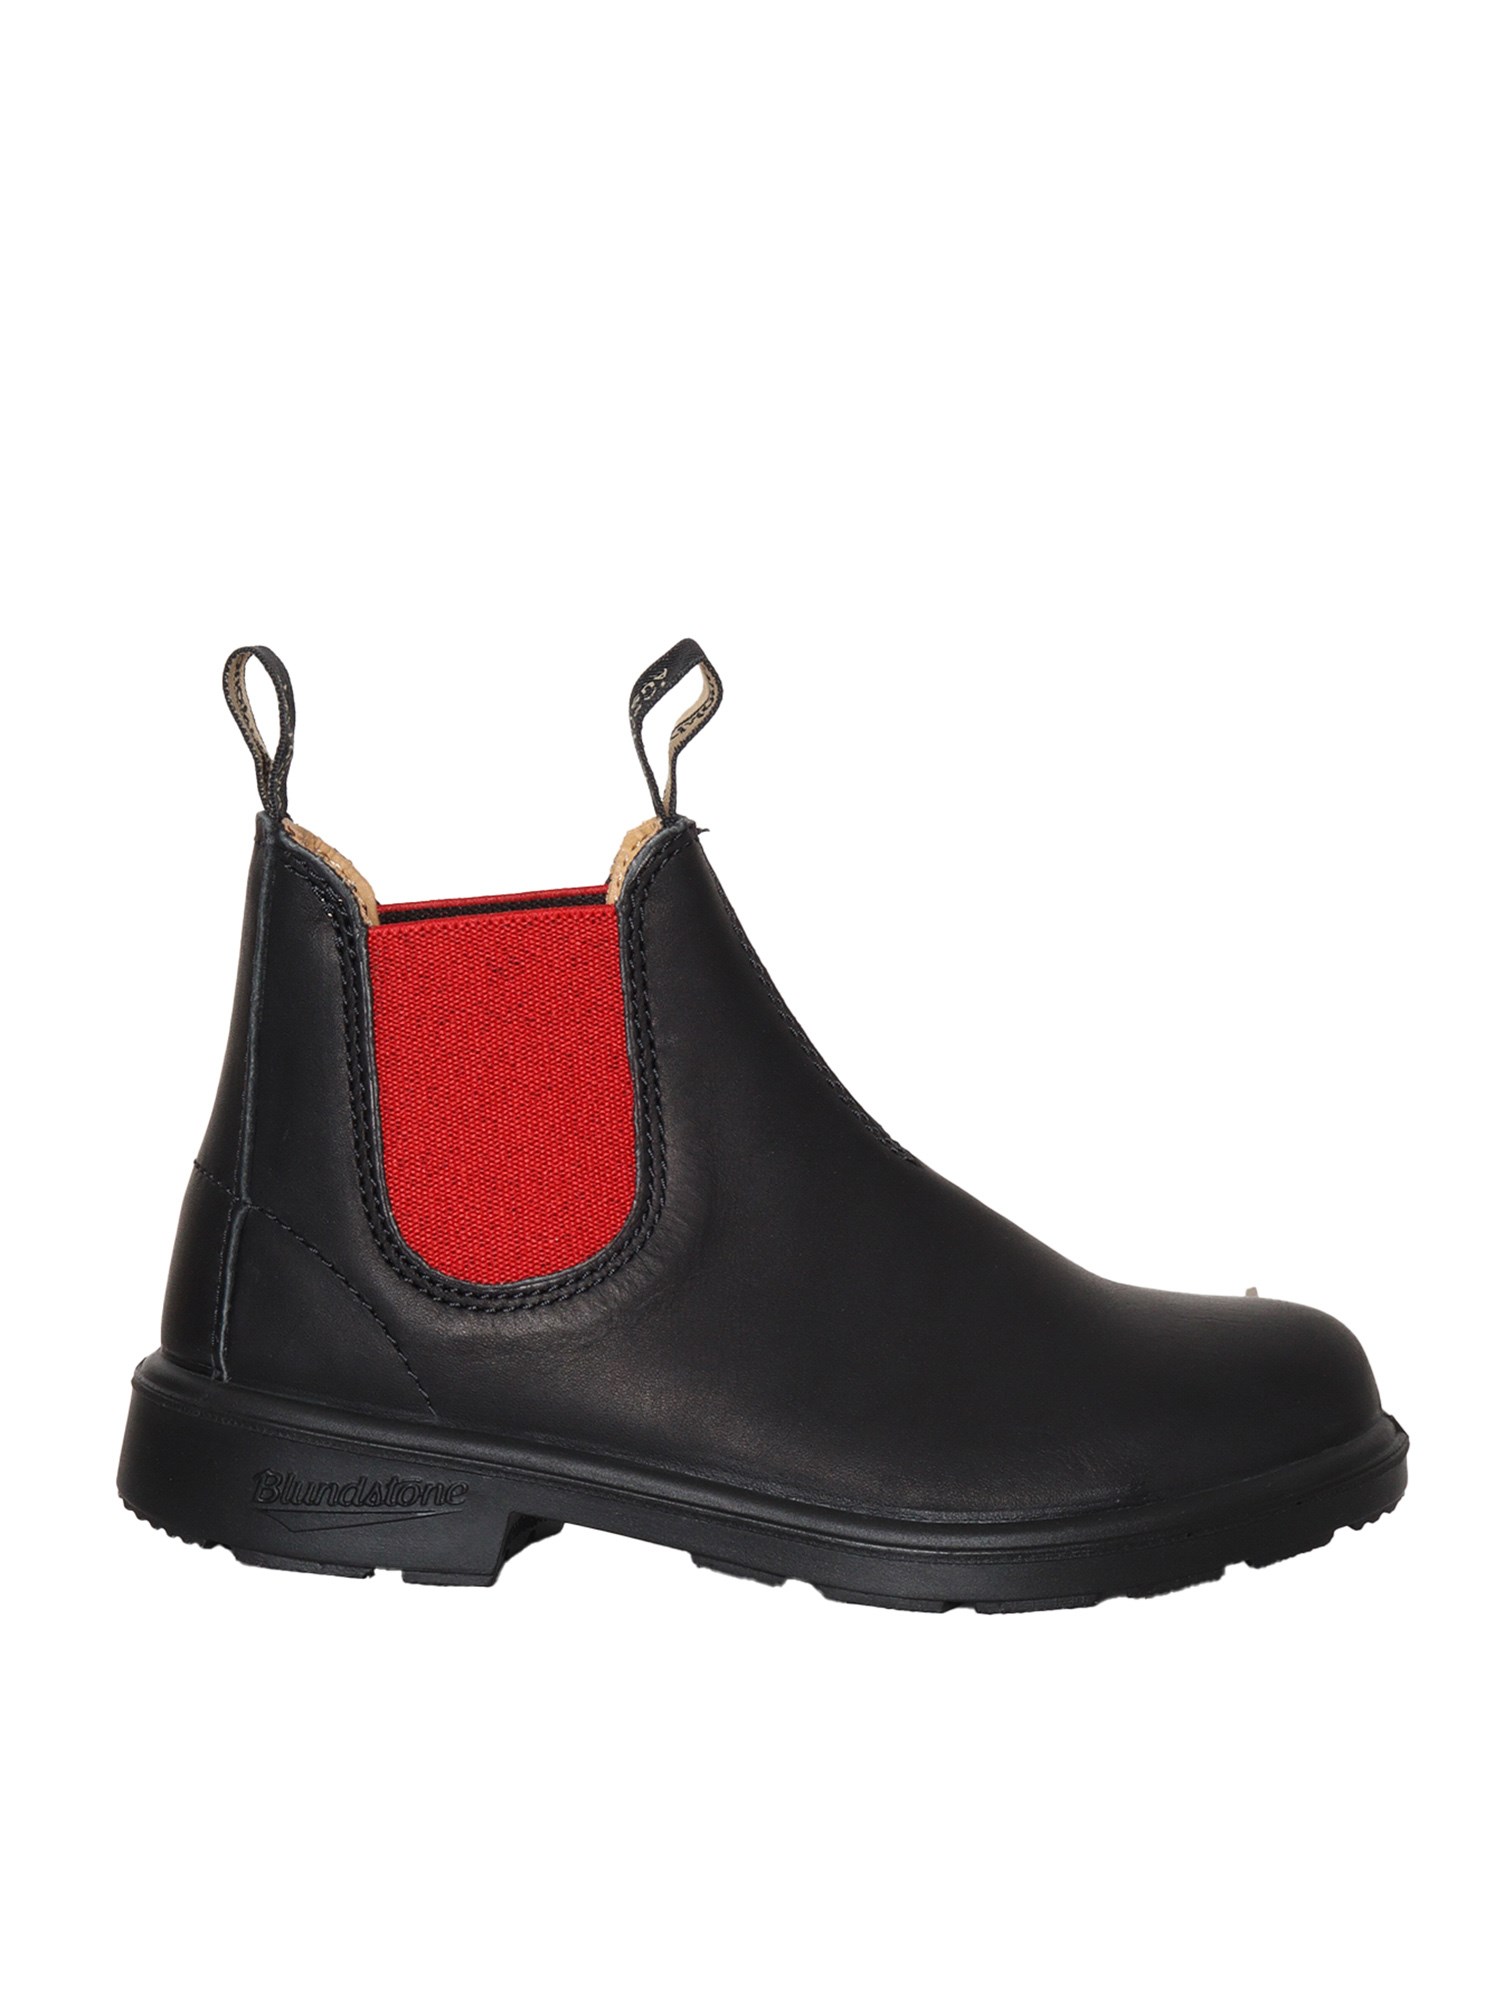 Blundstone 581 Ankle Boots In Black